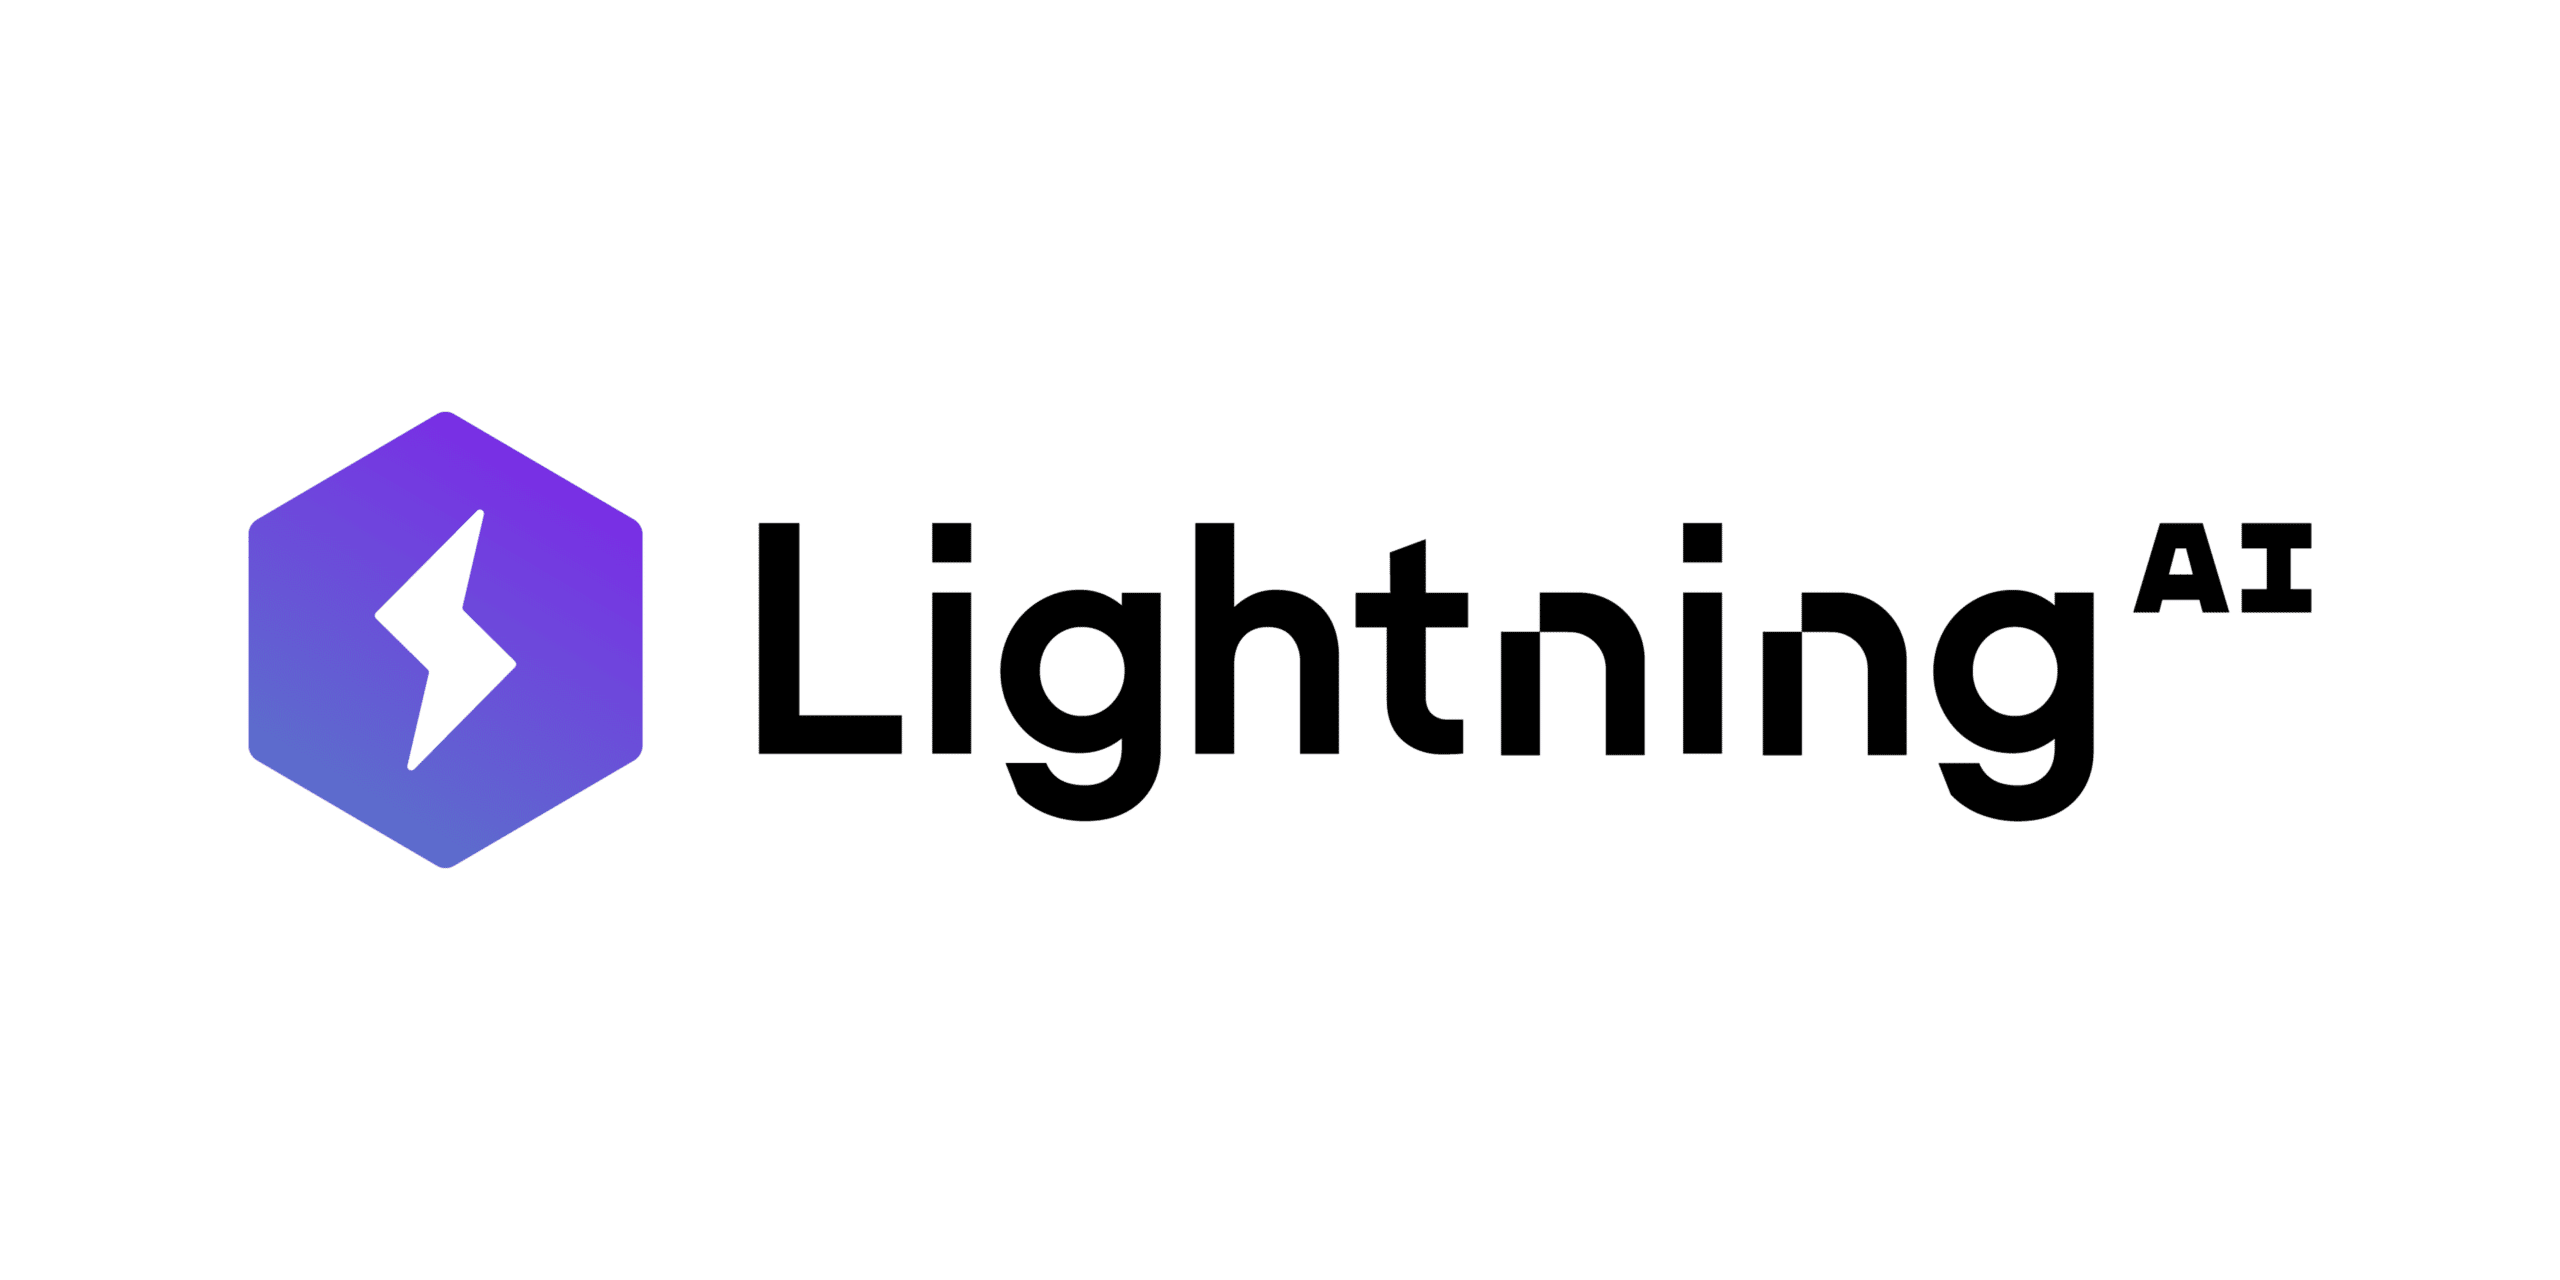 A Look at Lightning AI